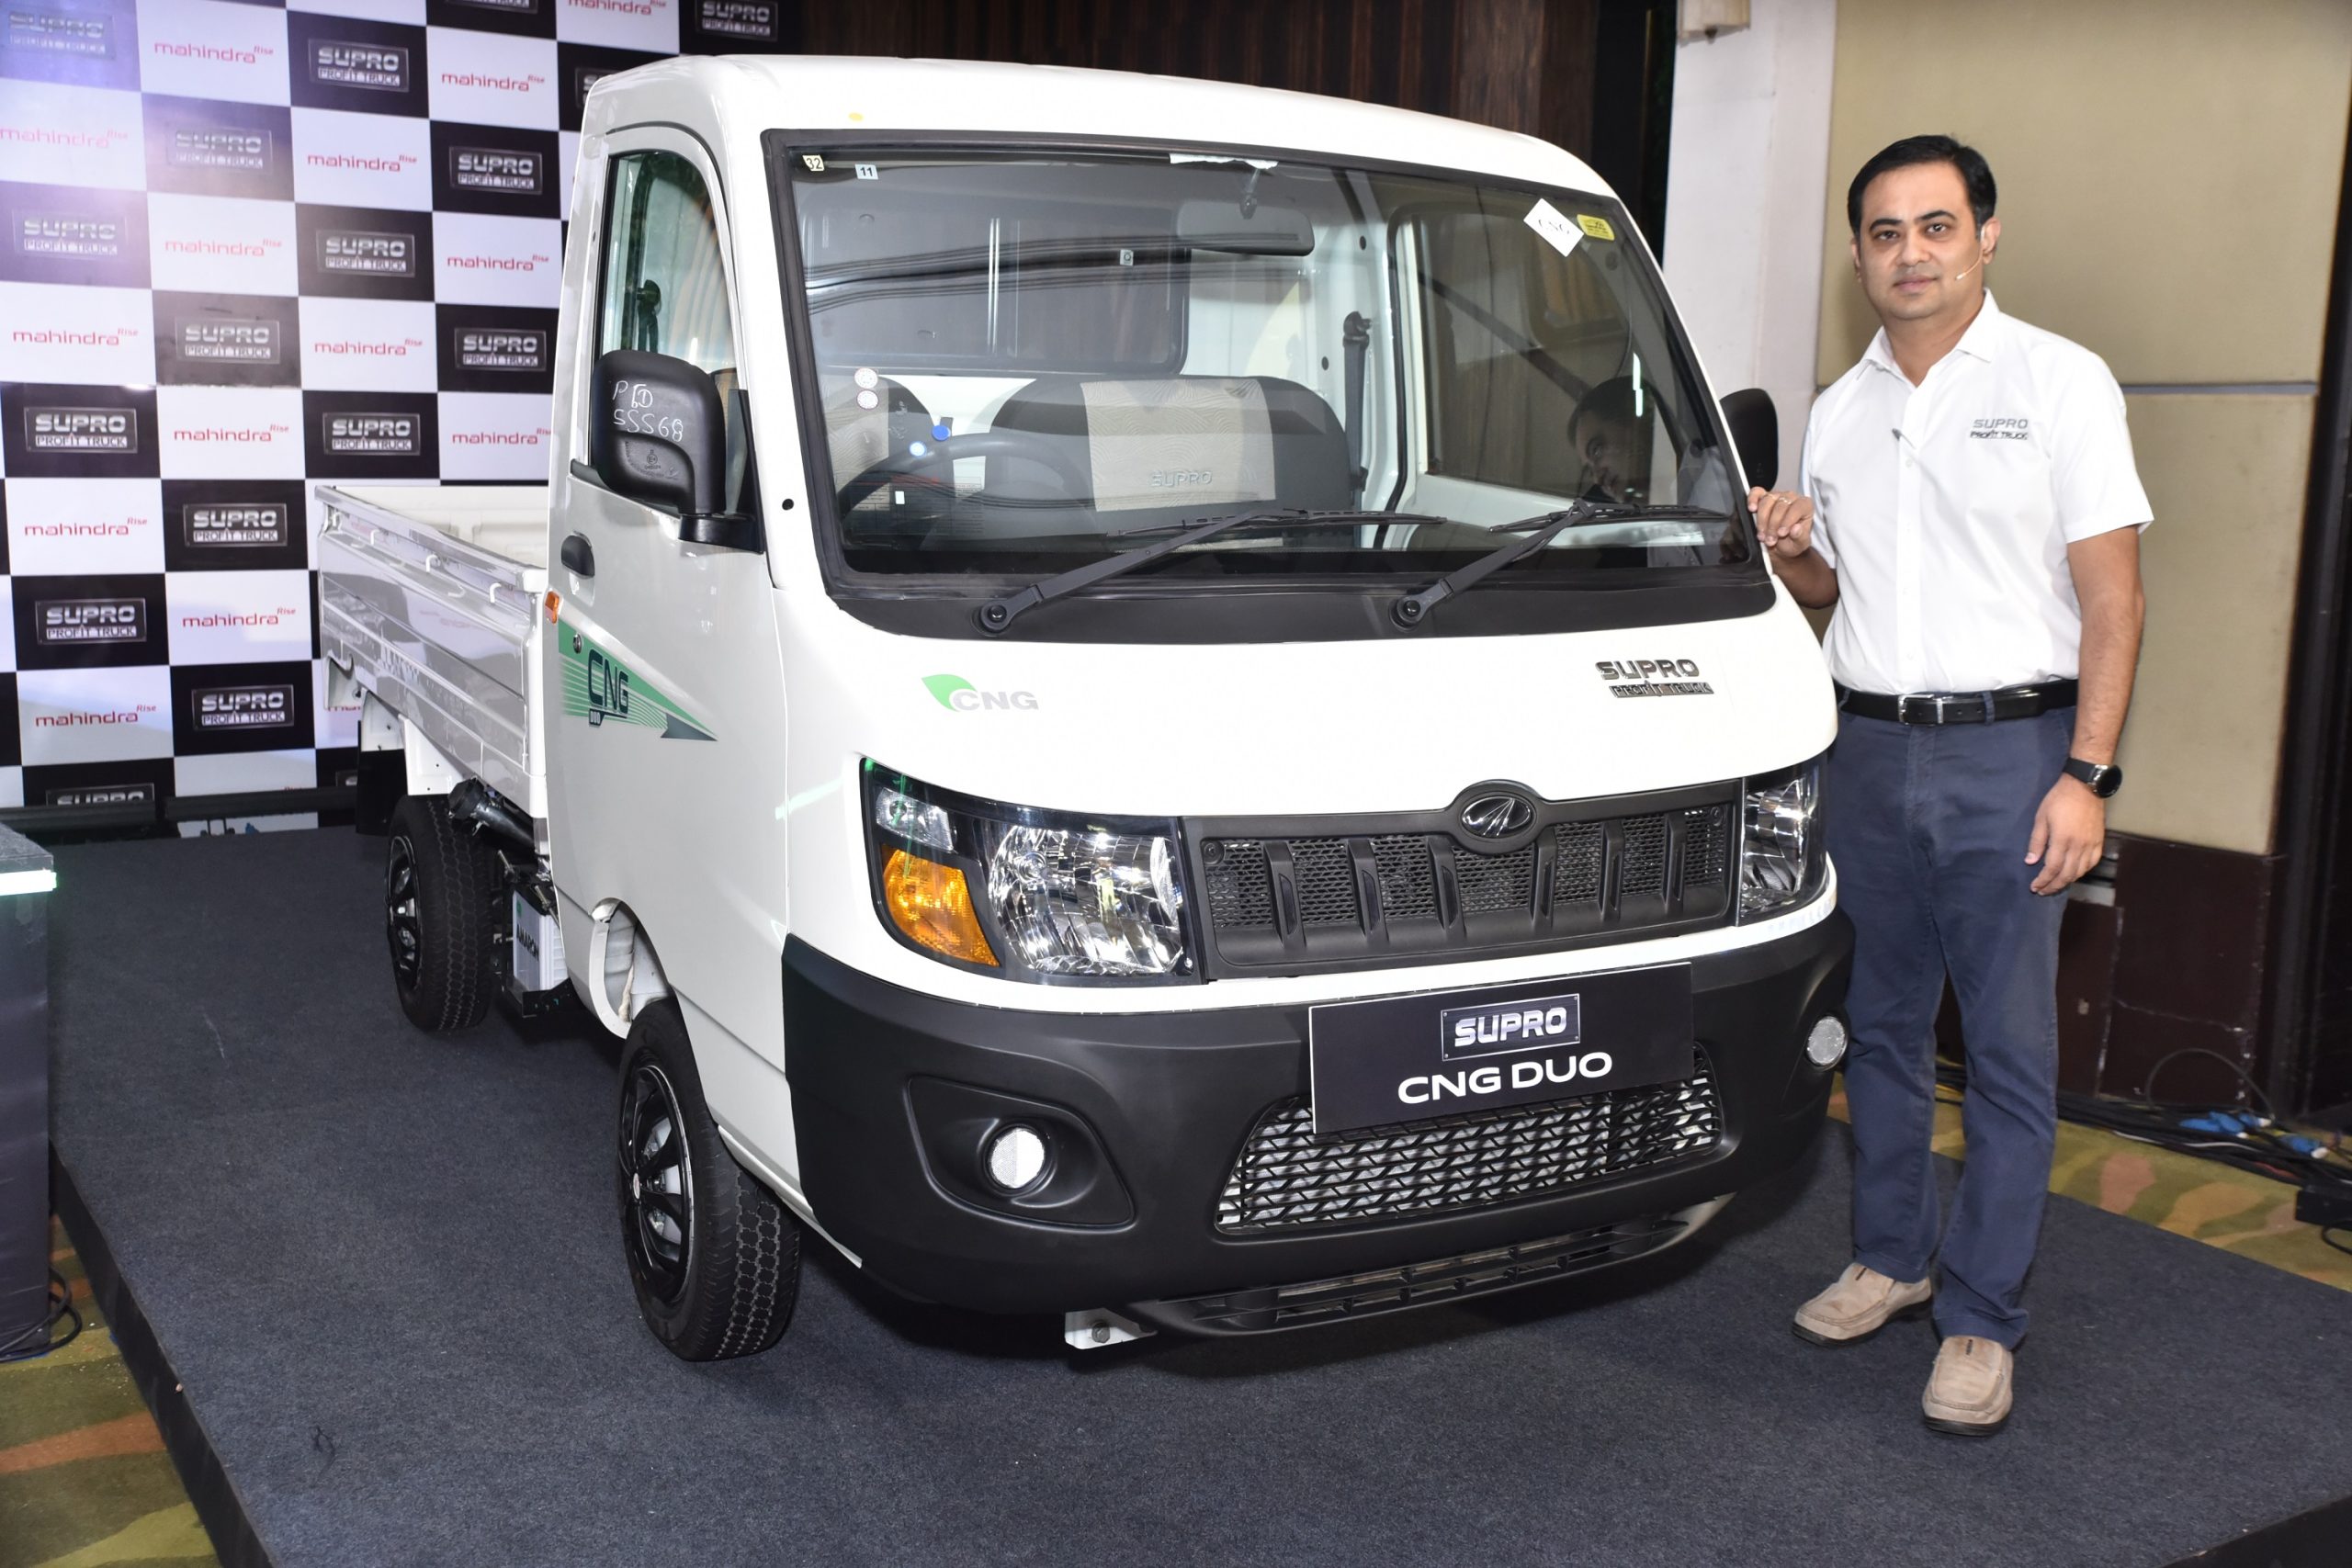 Mahindra launches new Supro CNG duo